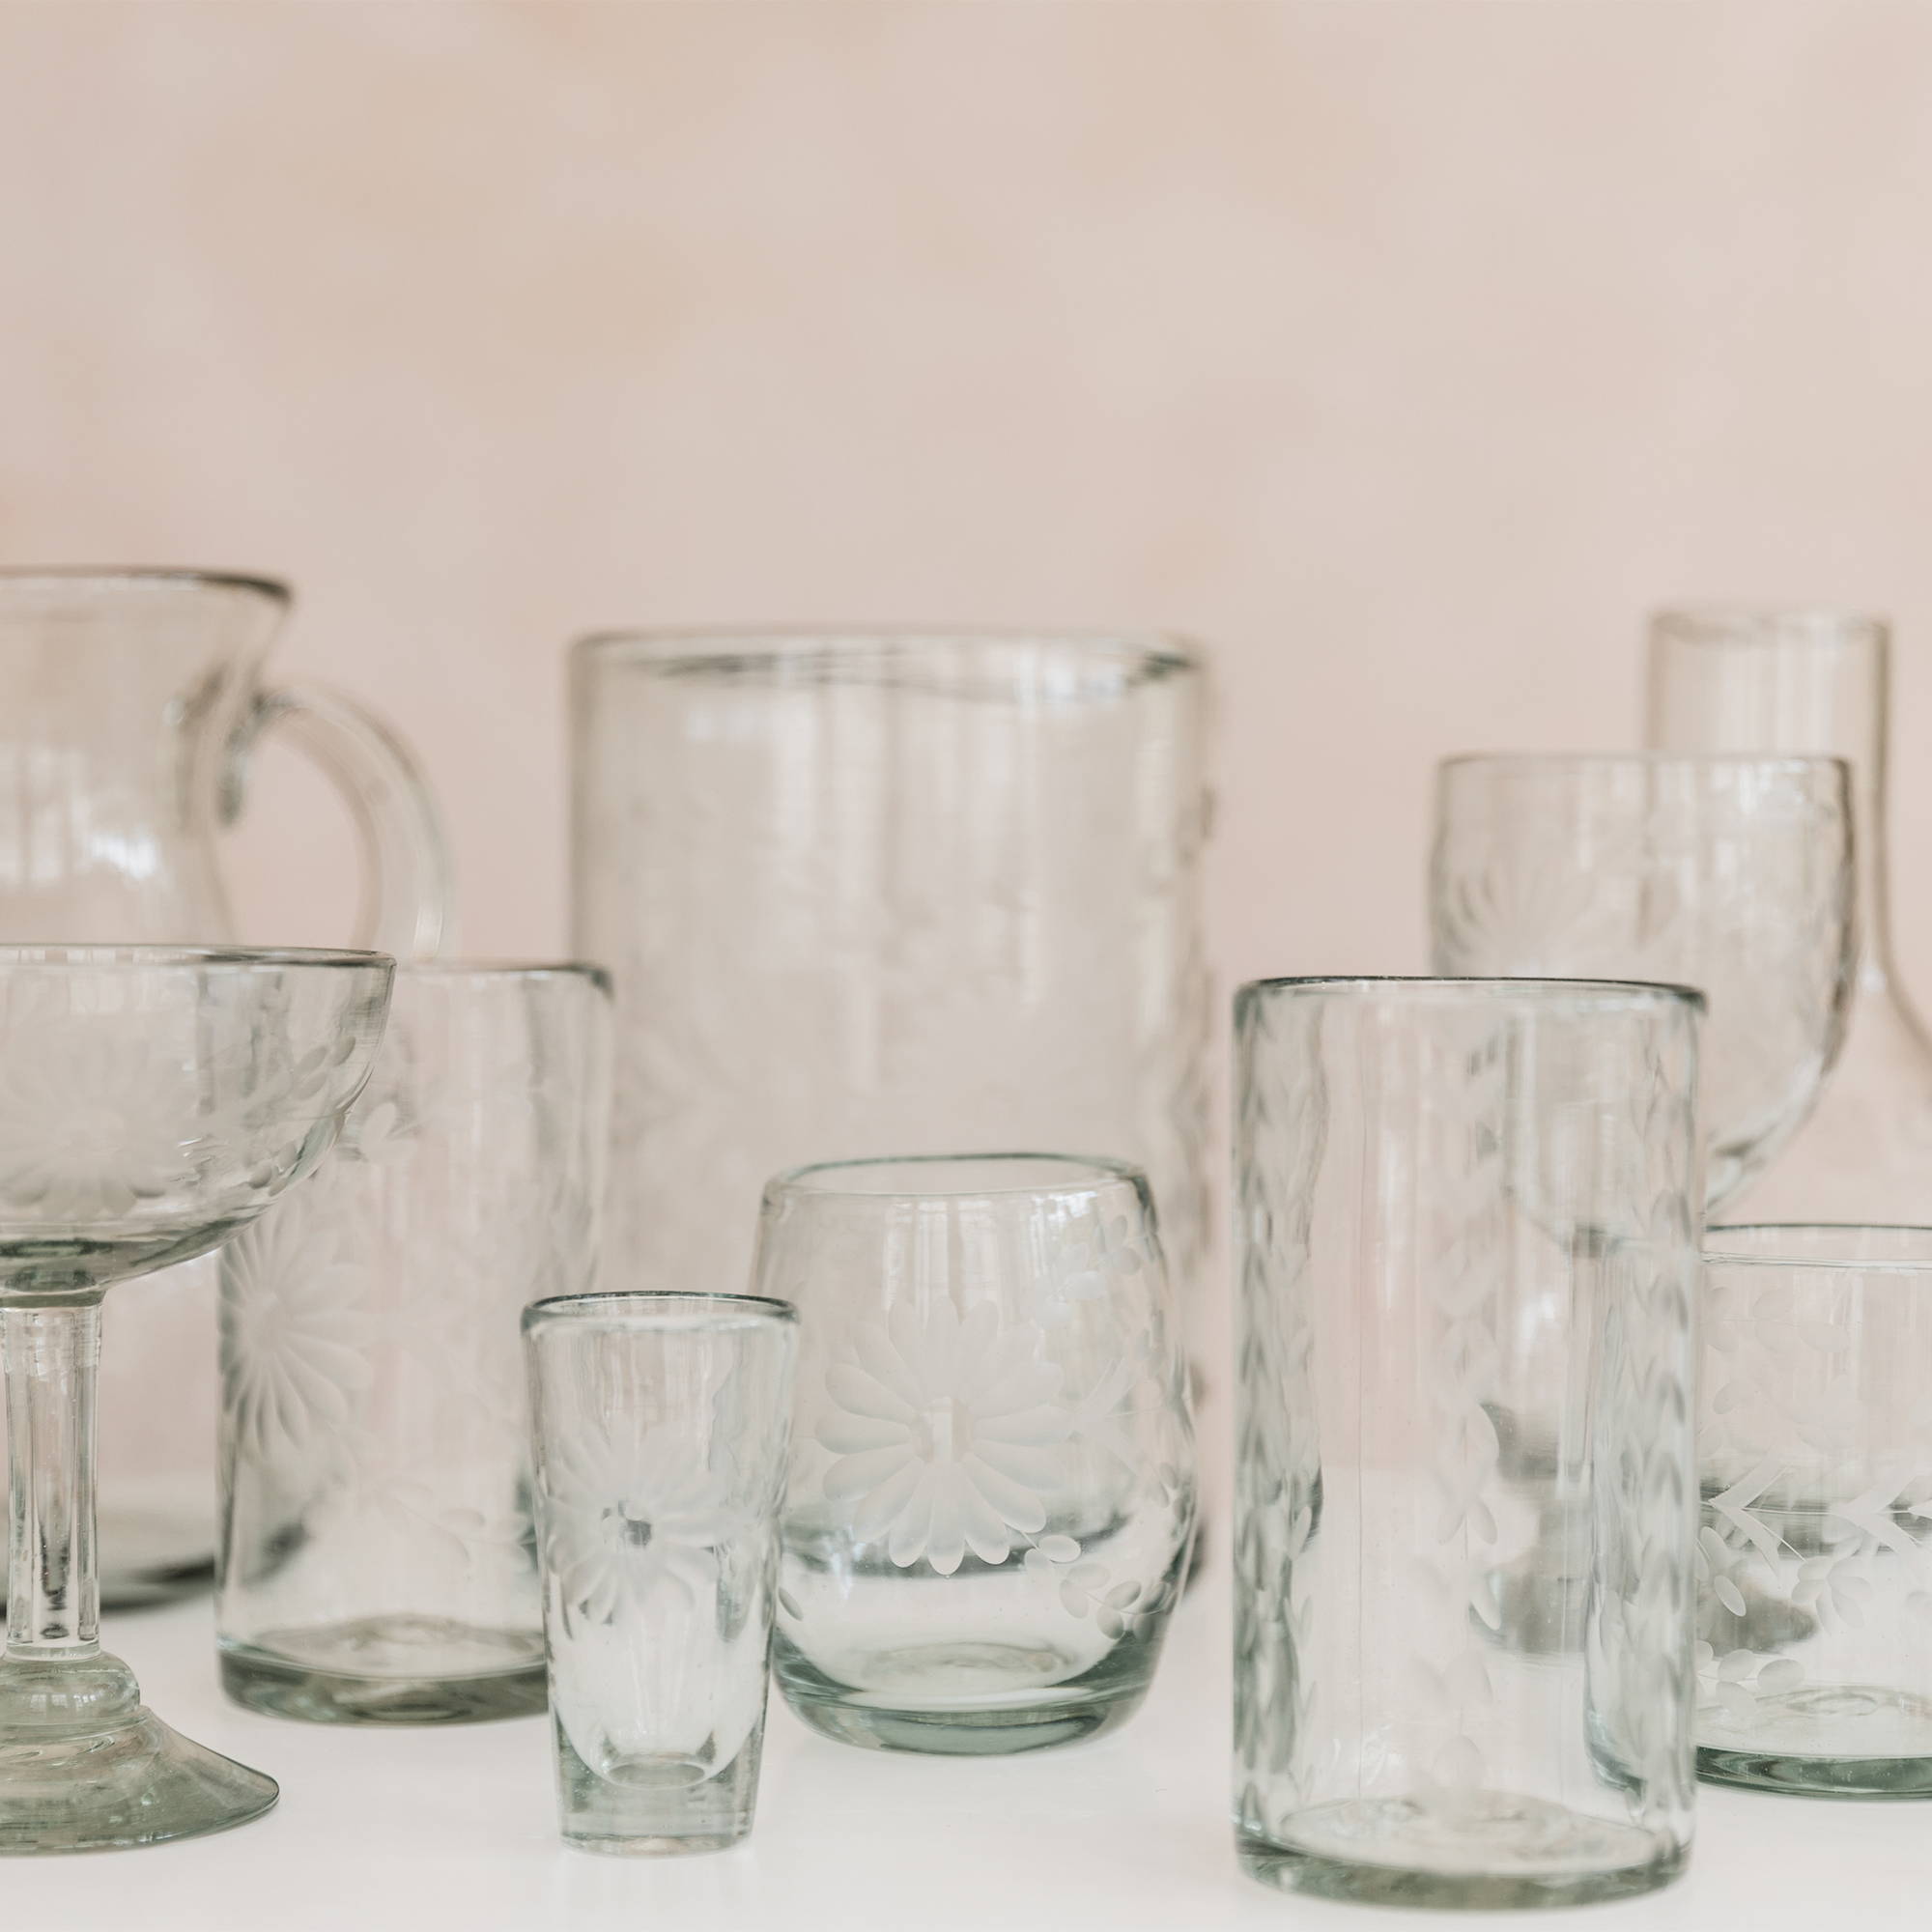  Behind-the-Scenes: Hand-Etched Glassware Made in Mexico | The Little Market